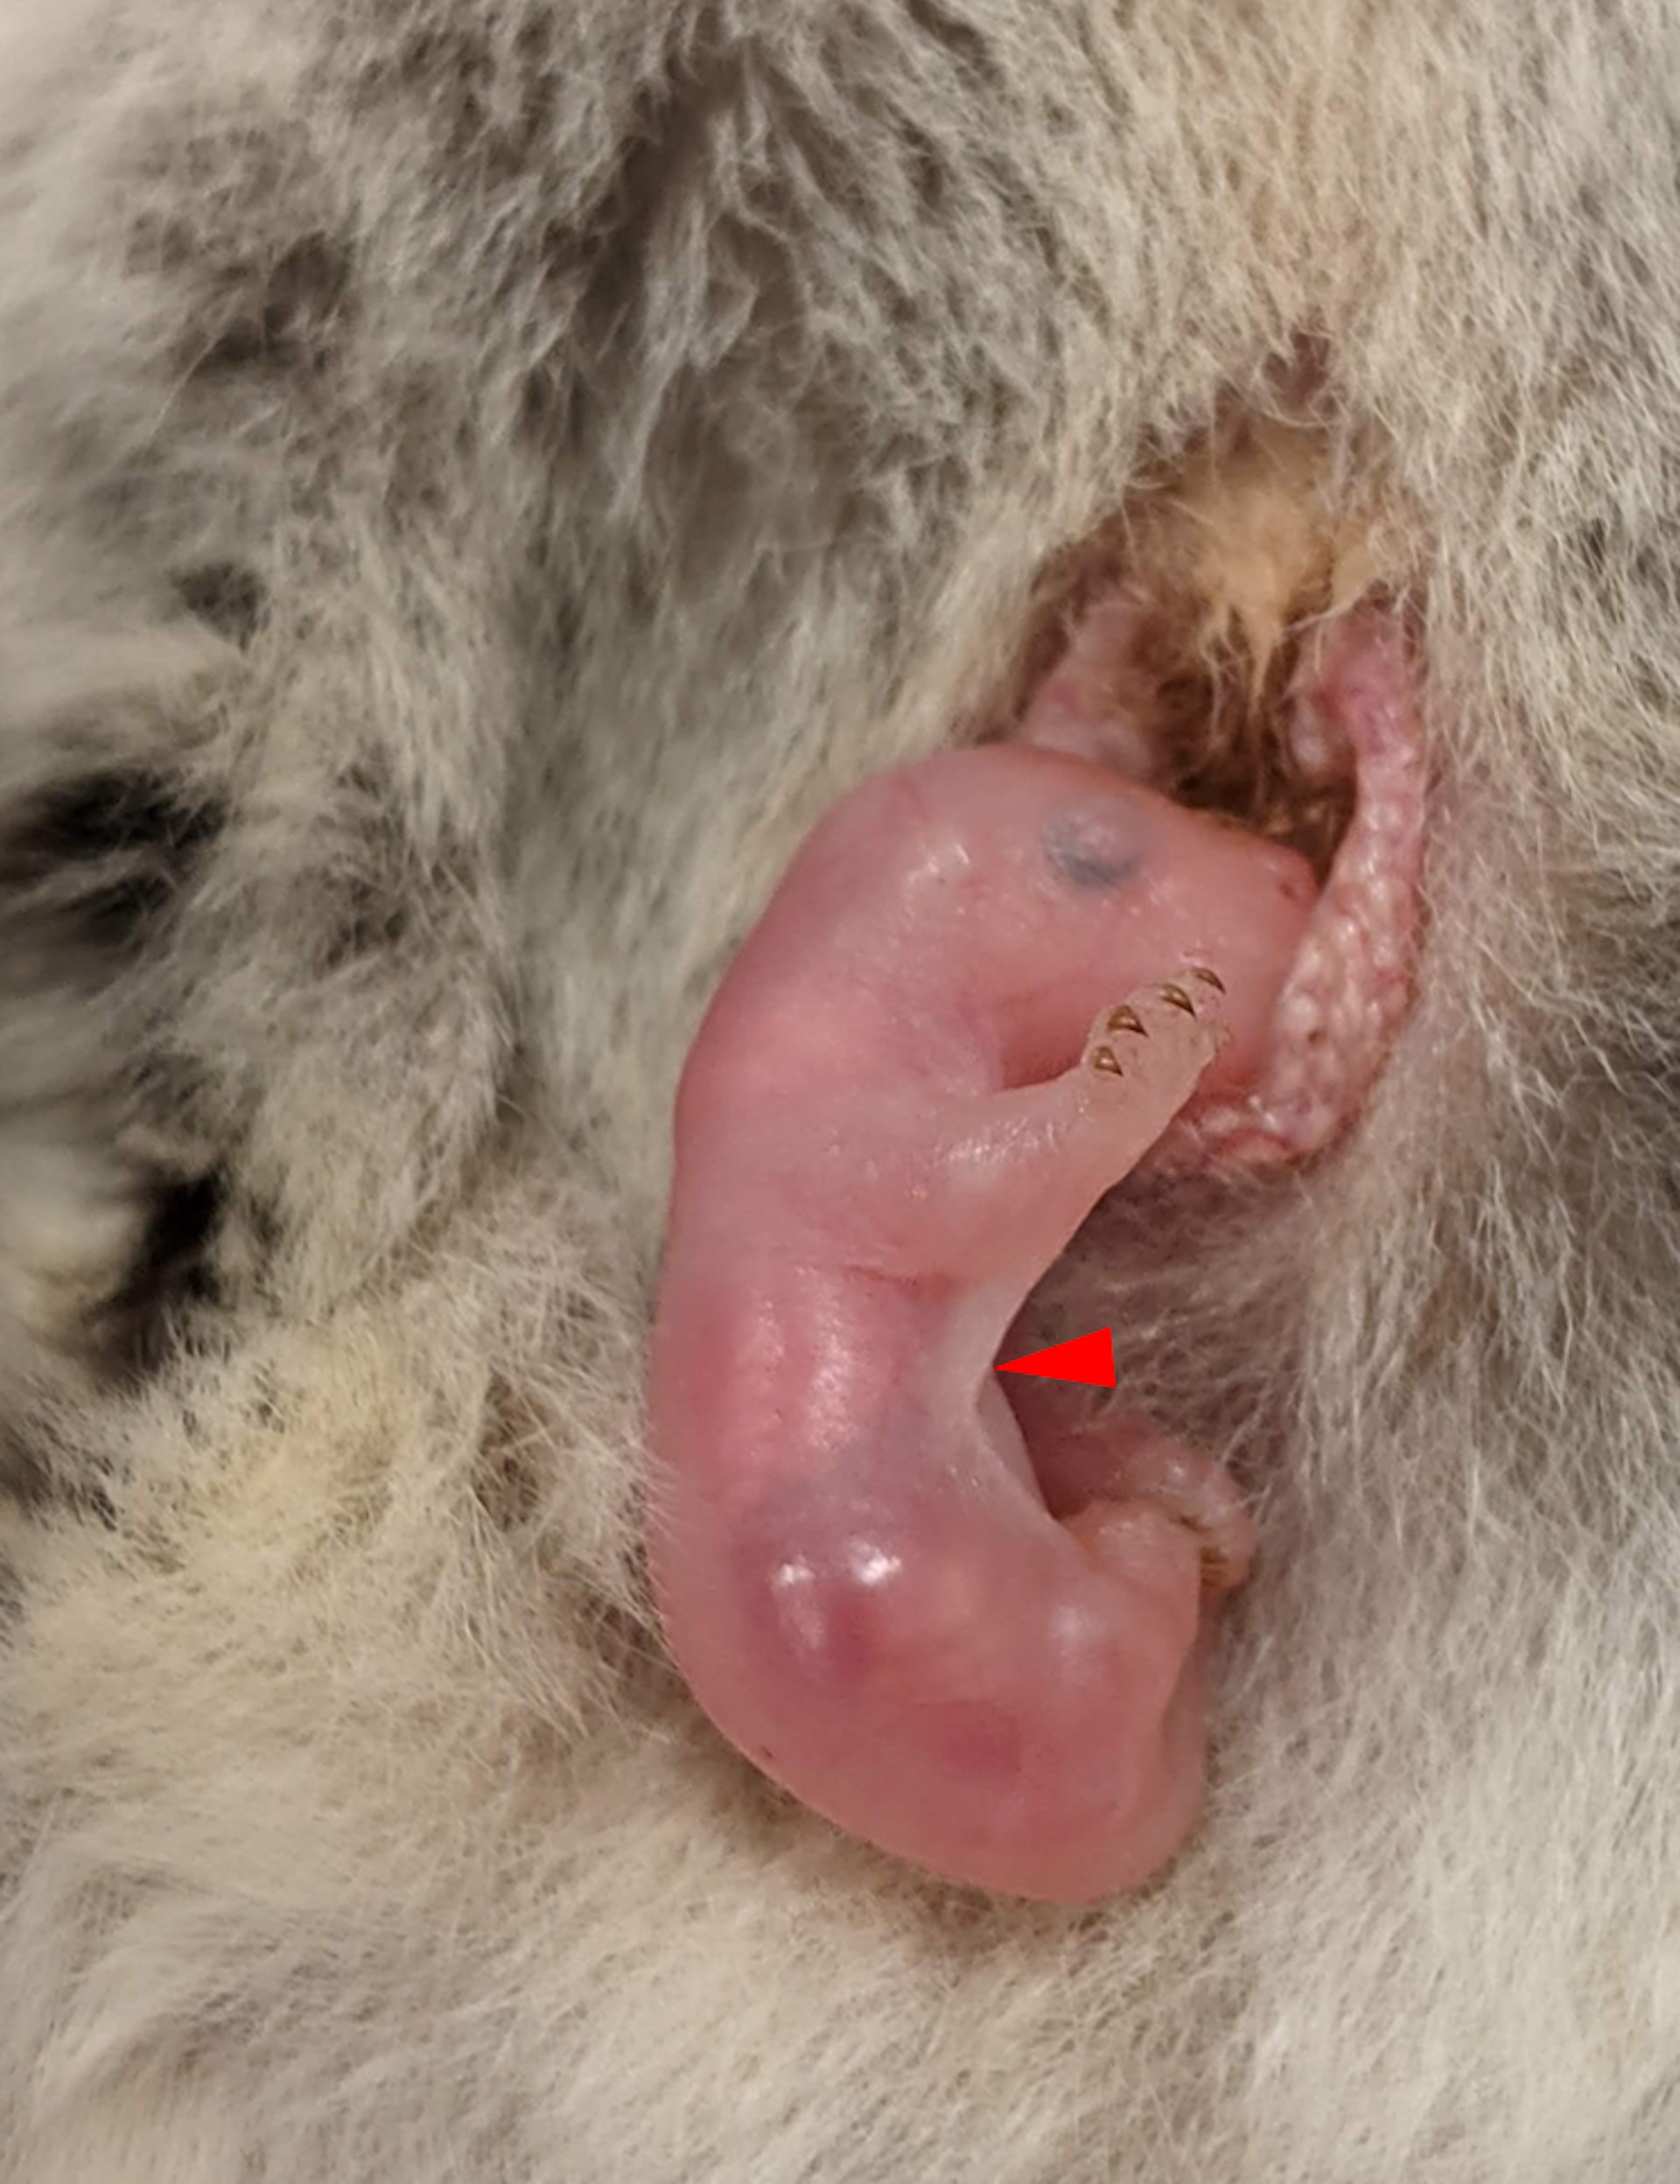 A pink baby animal looking much like an embryo with a red arrow pointing at a thin membrane it its armpit